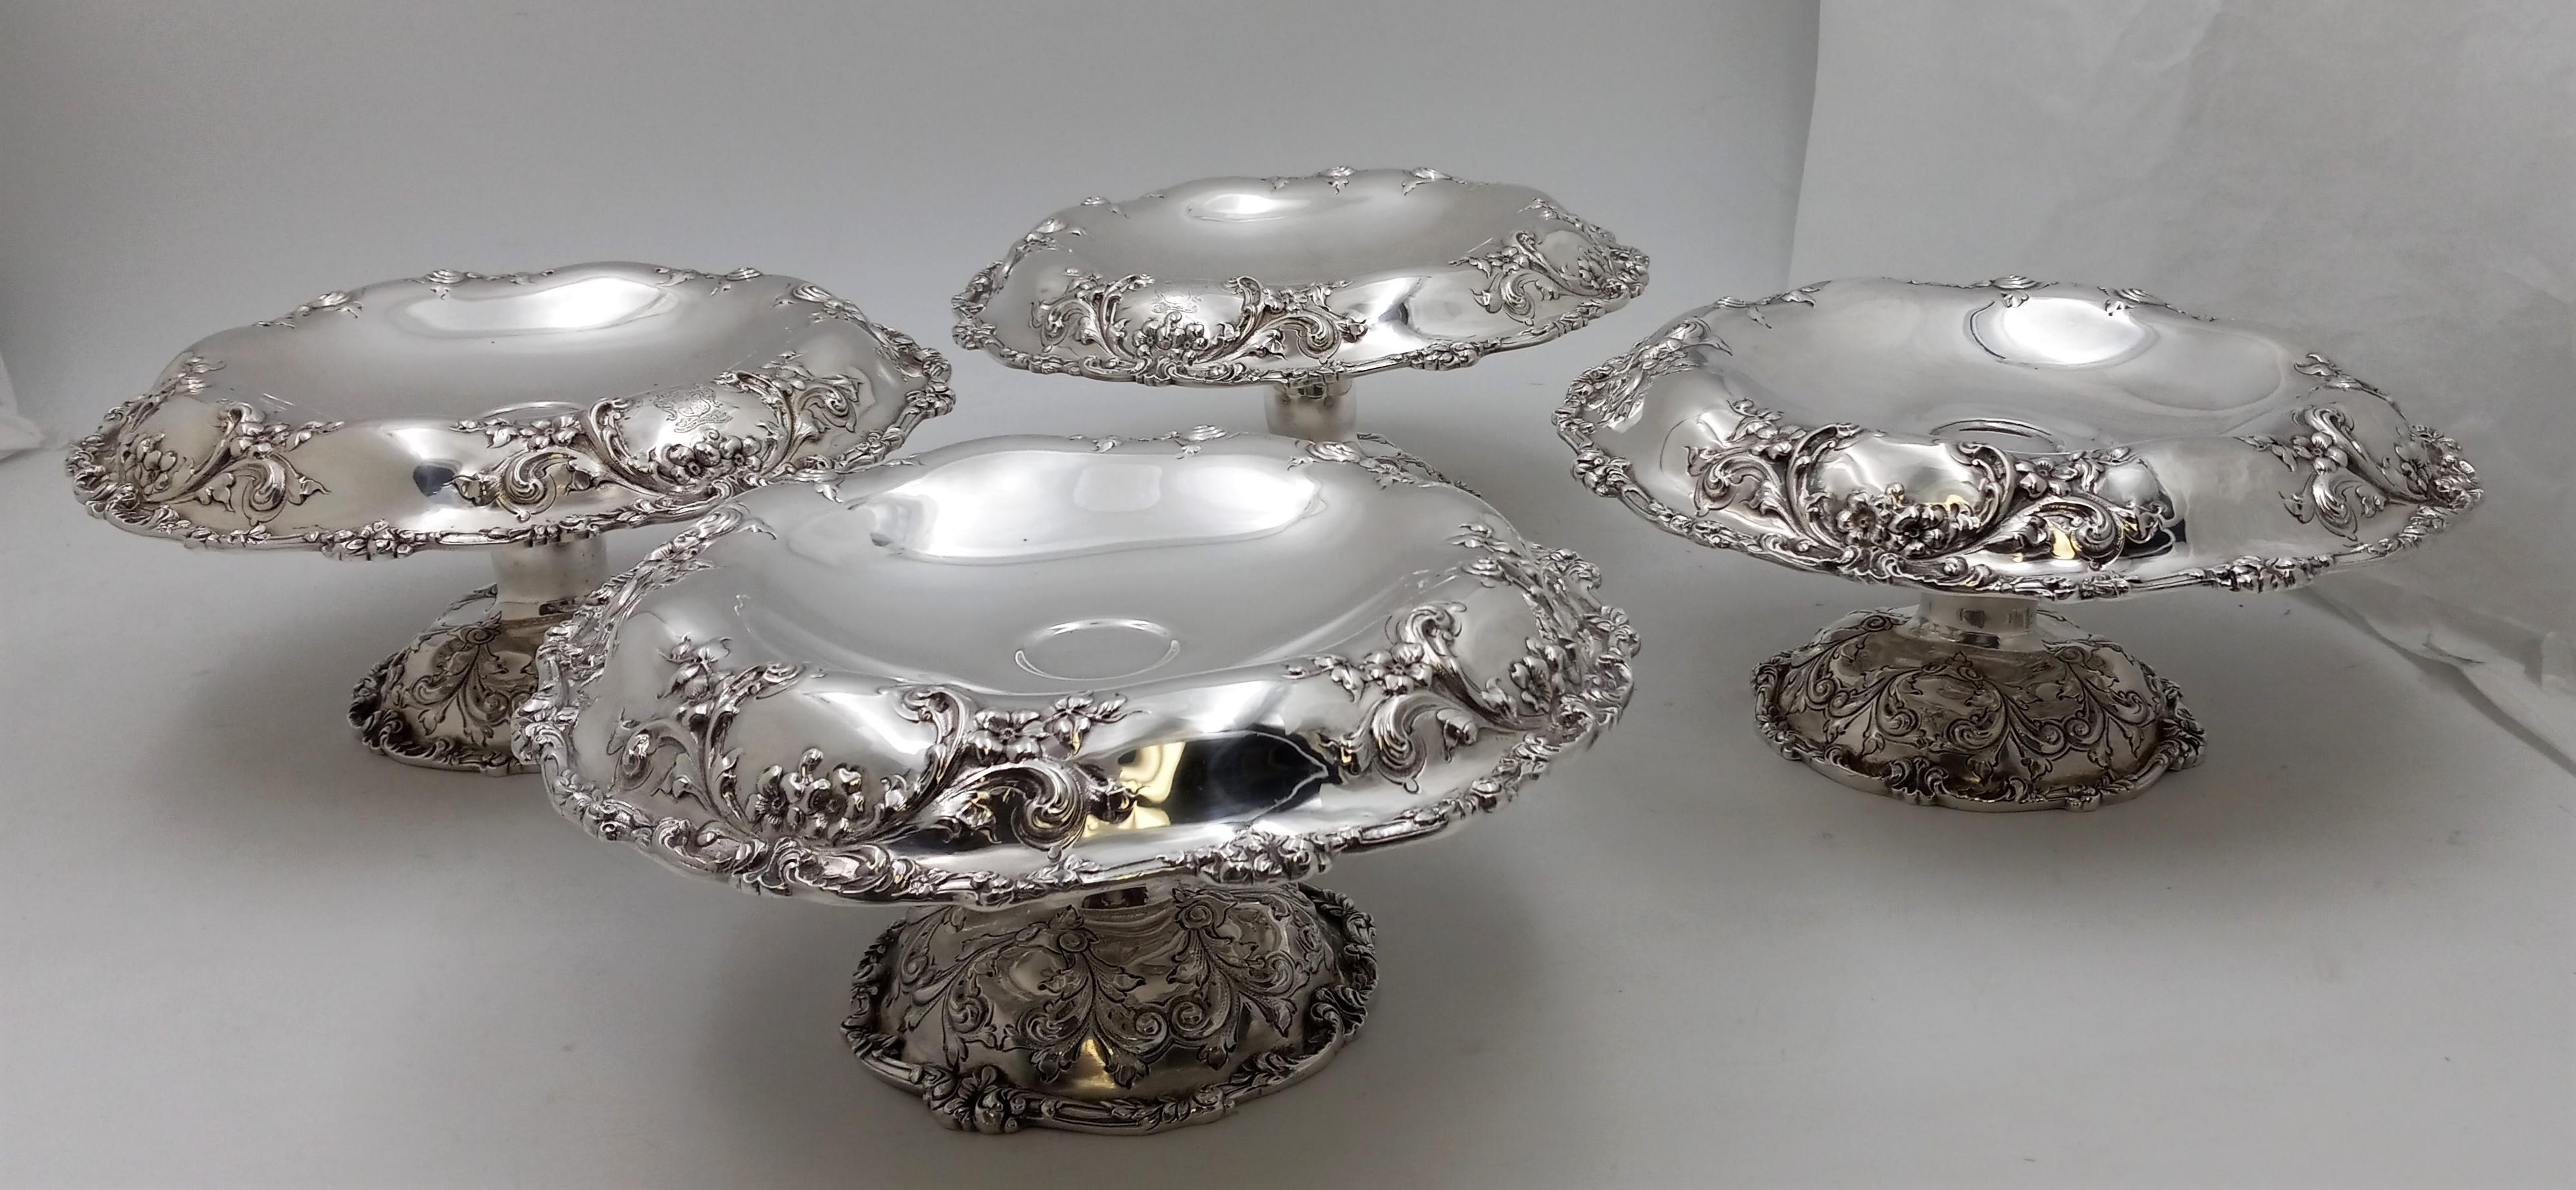 American J.E. Caldwell & Co. Sterling Silver Art Nouveau Set of 4 Compote Dishes For Sale